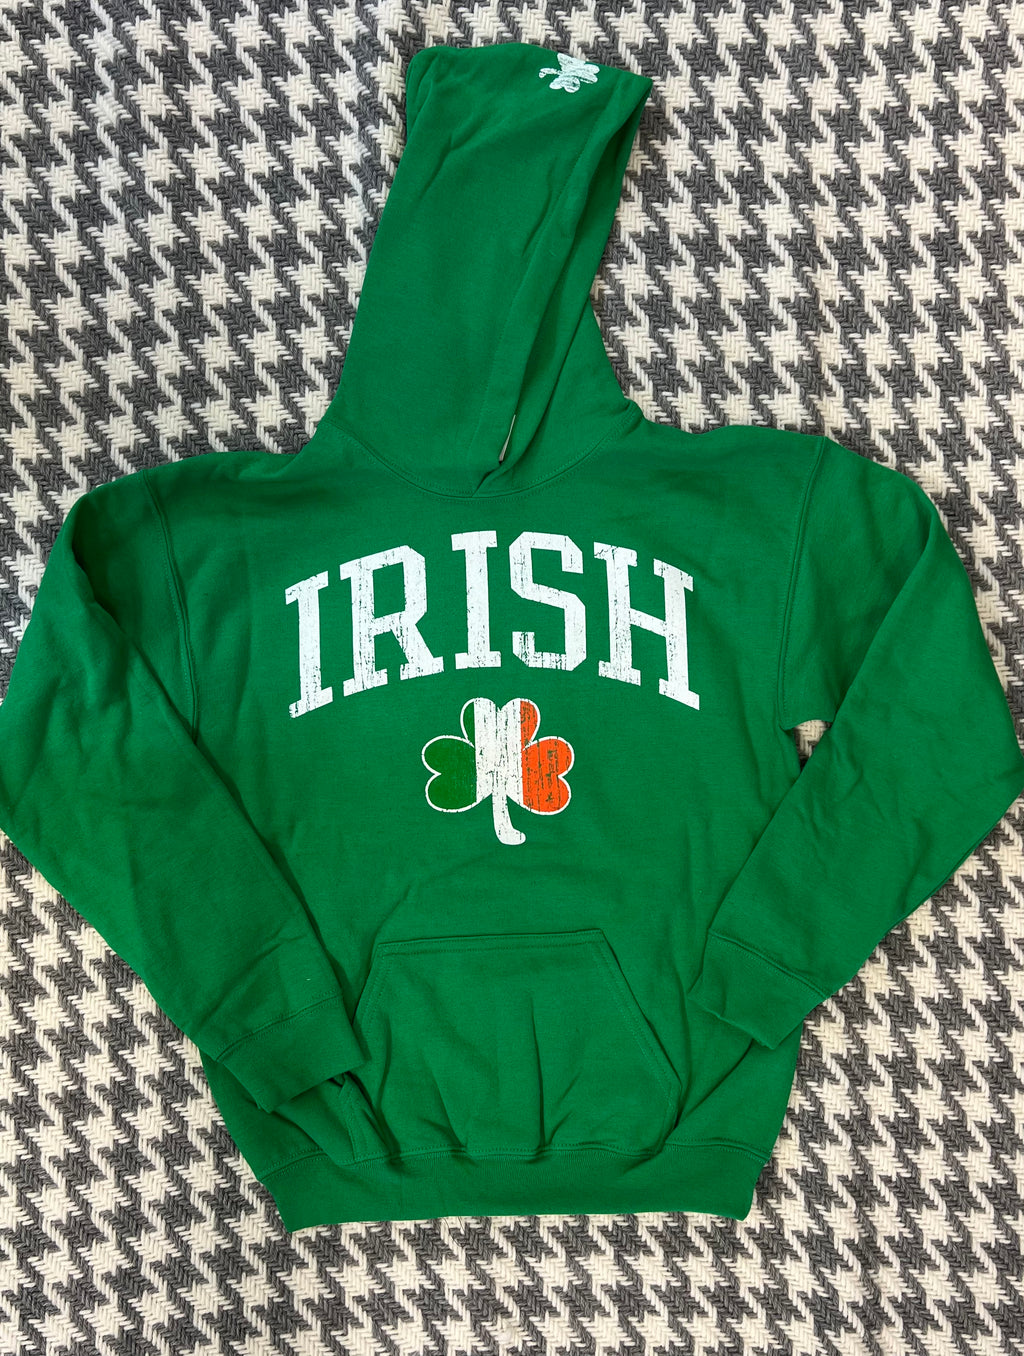 Adult and Youth Irish tri color shamrock hoodie